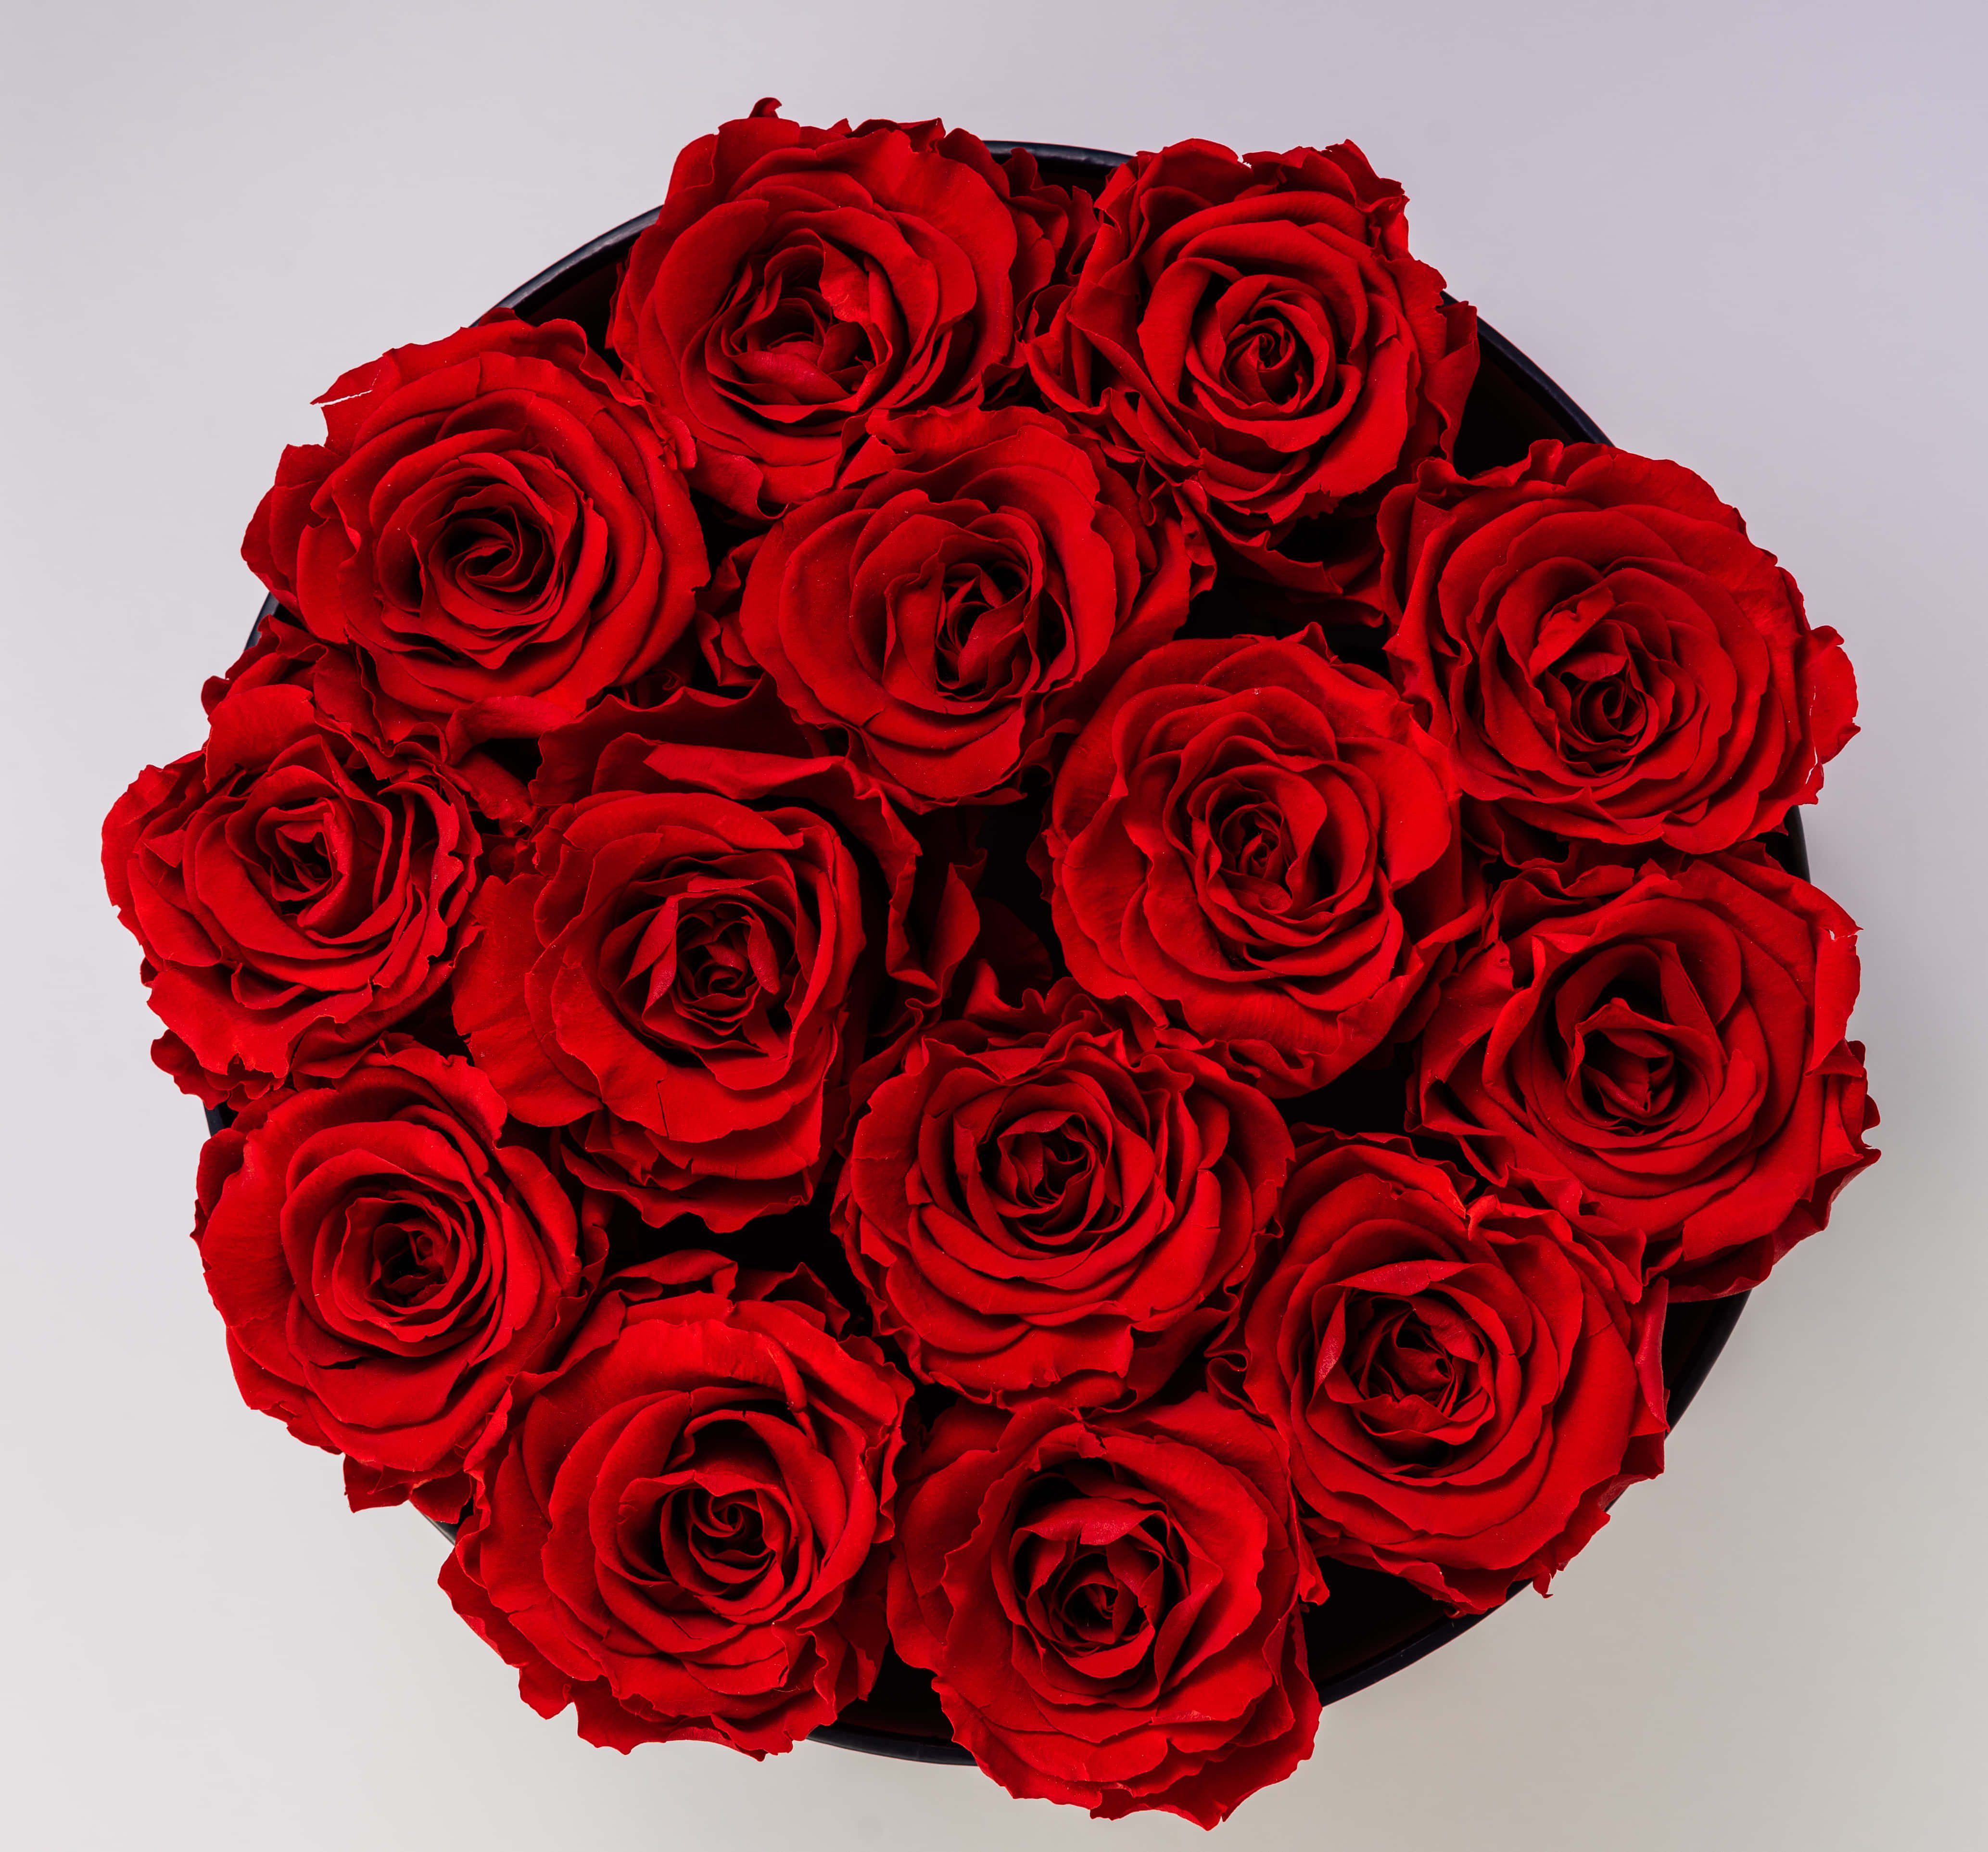 Download Pure Red Rose Bouquet Wallpaper | Wallpapers.com